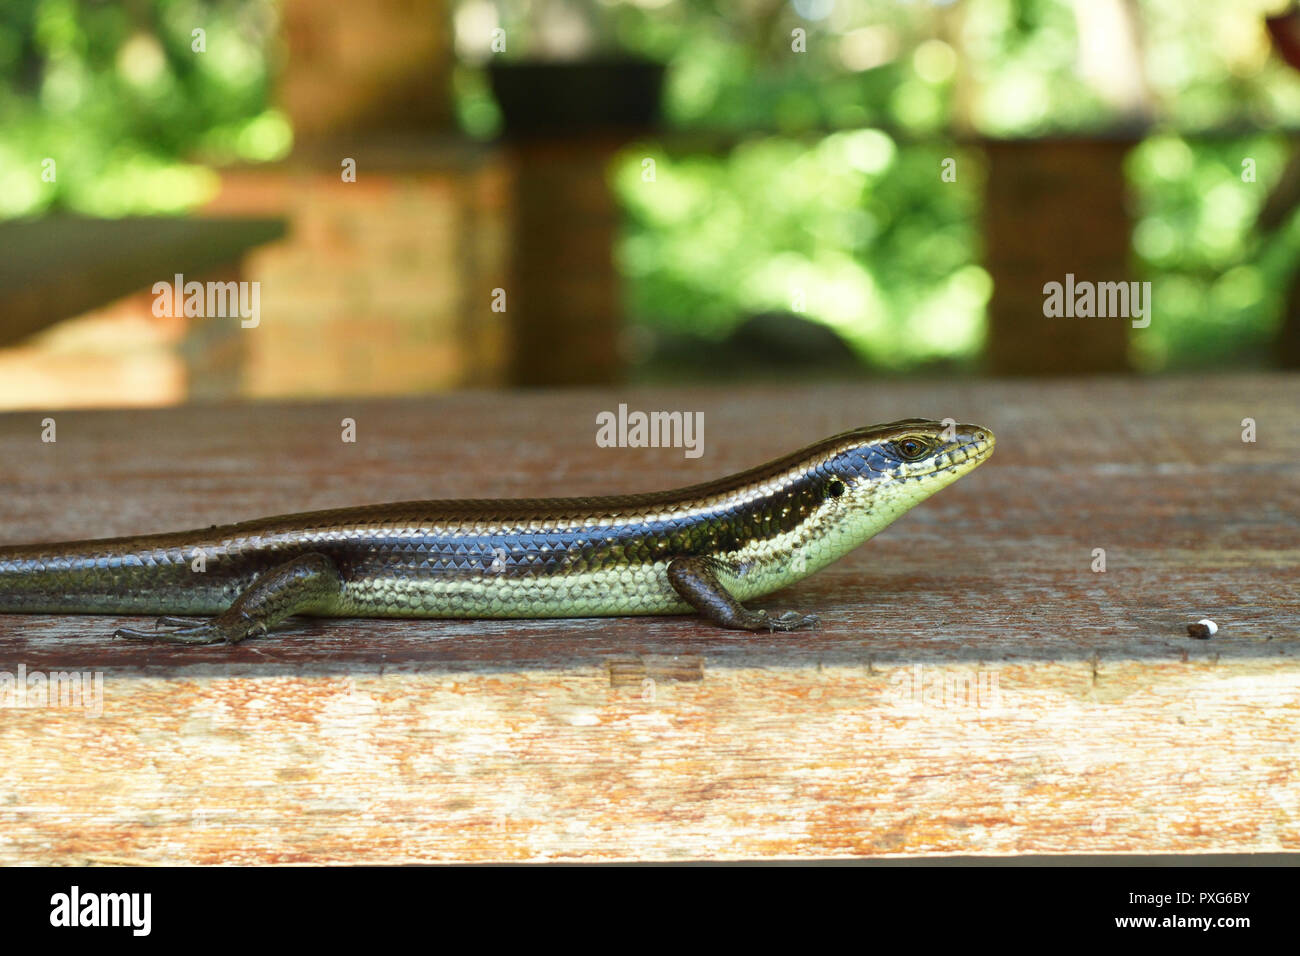 Long-tailed Sun Skink on a wooden board with natural green background , Reptiles have scales in Thailand Stock Photo